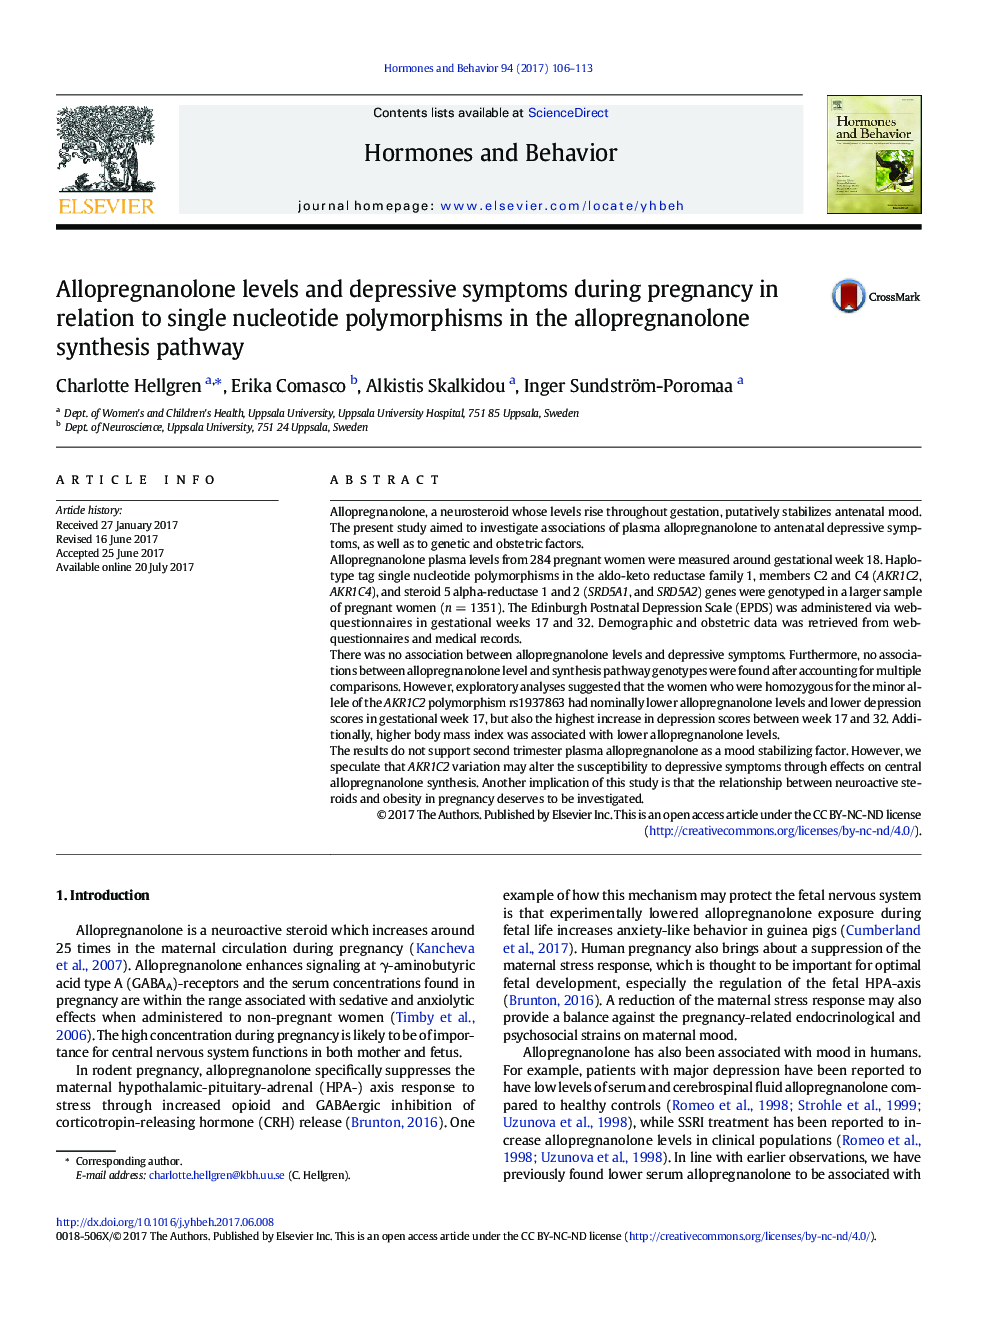 Allopregnanolone levels and depressive symptoms during pregnancy in relation to single nucleotide polymorphisms in the allopregnanolone synthesis pathway